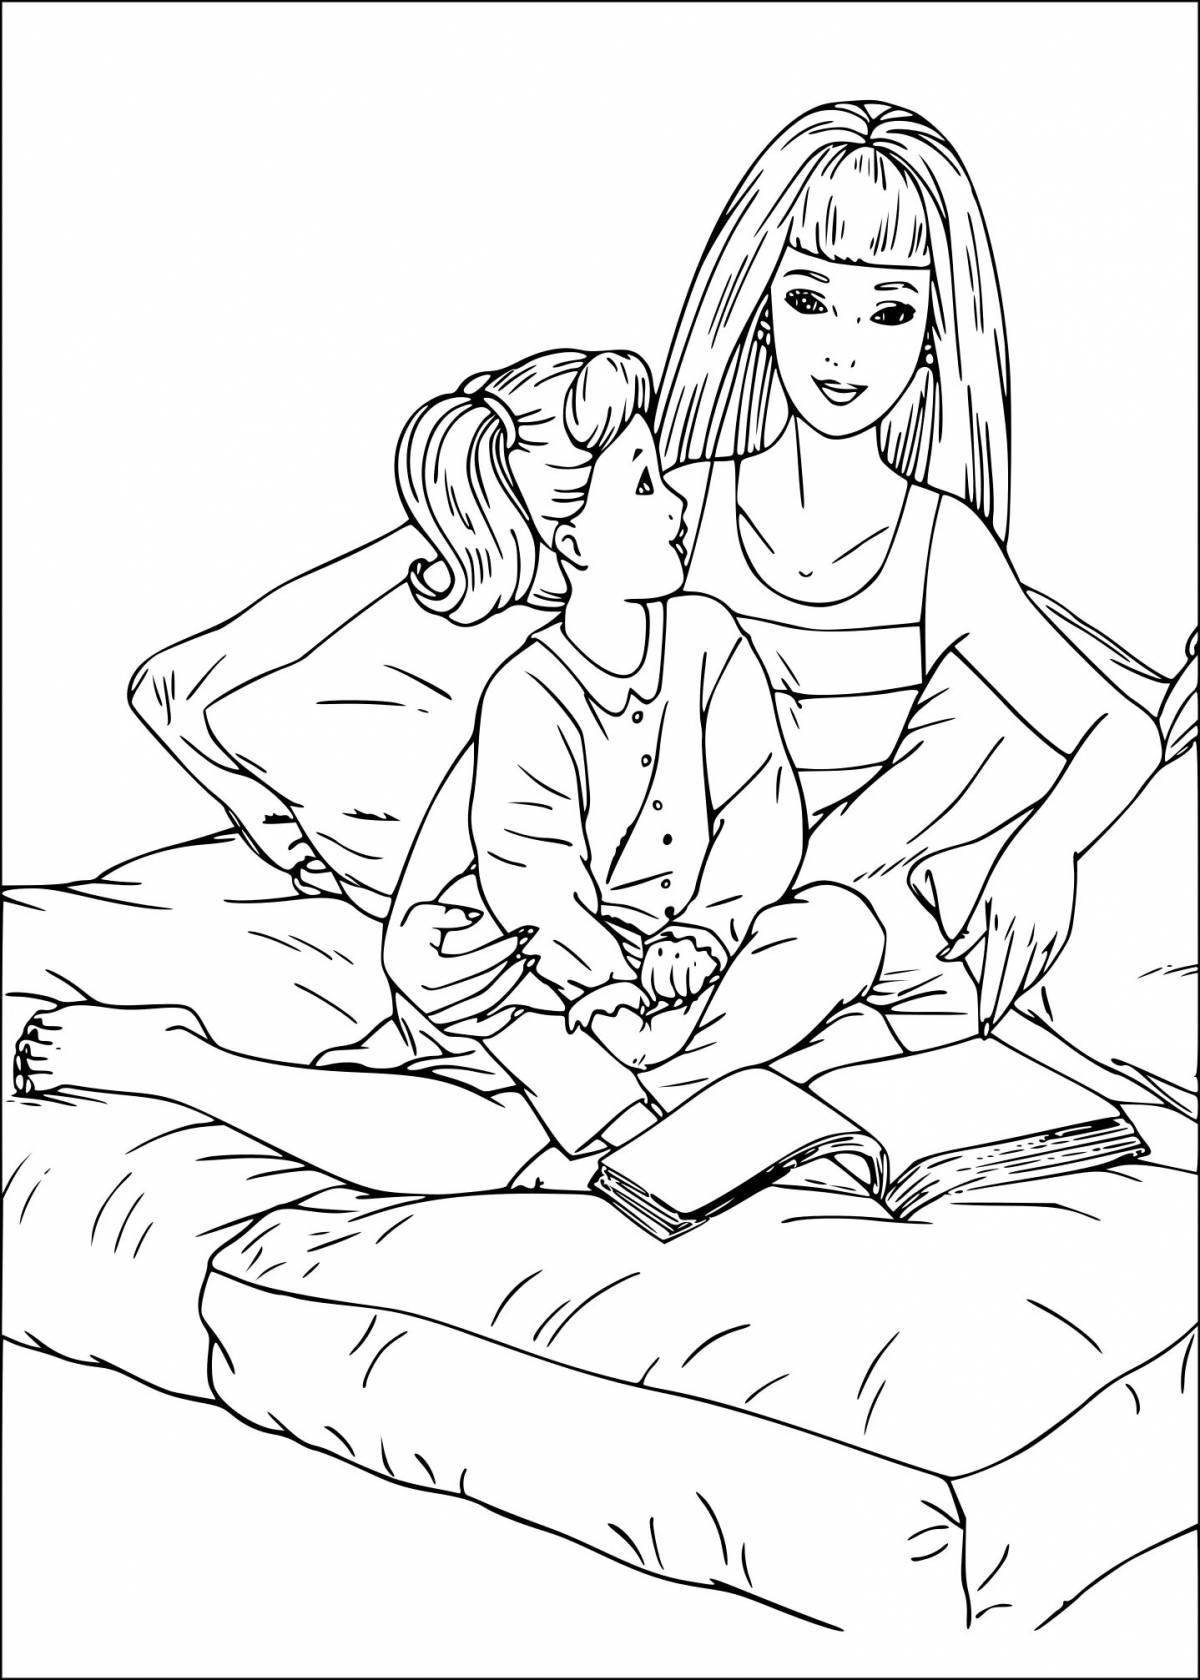 Adorable barbie and daughter coloring book